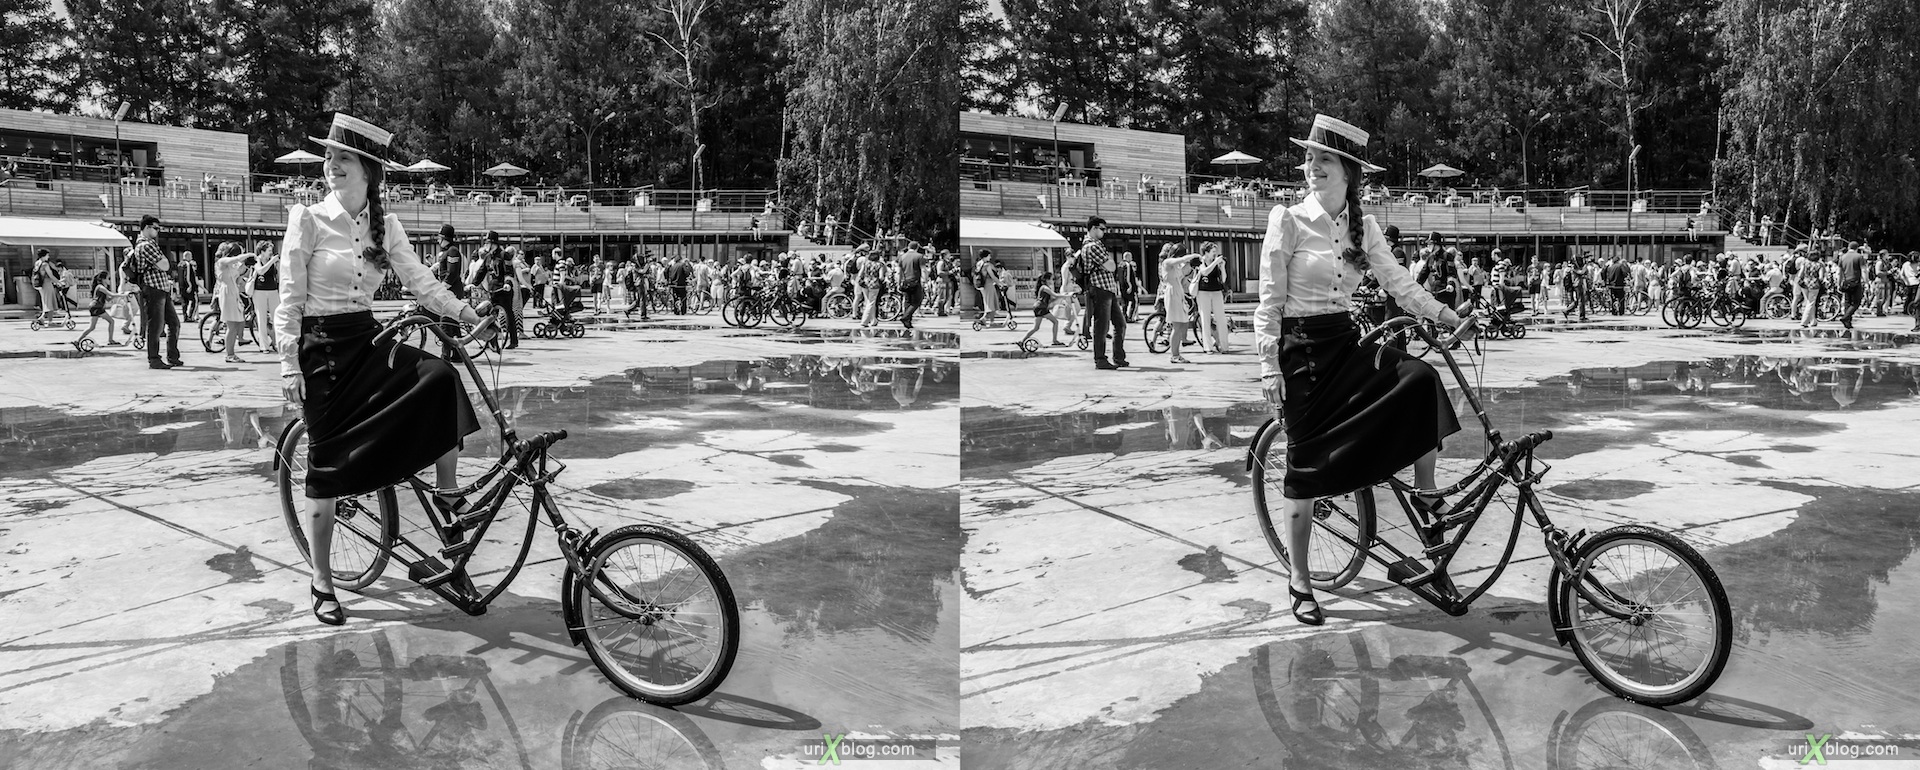 2013, old, ancient, bikes, bicycles, exhibition, rally, Moscow, Russia, 3D, stereo pair, cross-eyed, crossview, cross view stereo pair, stereoscopic